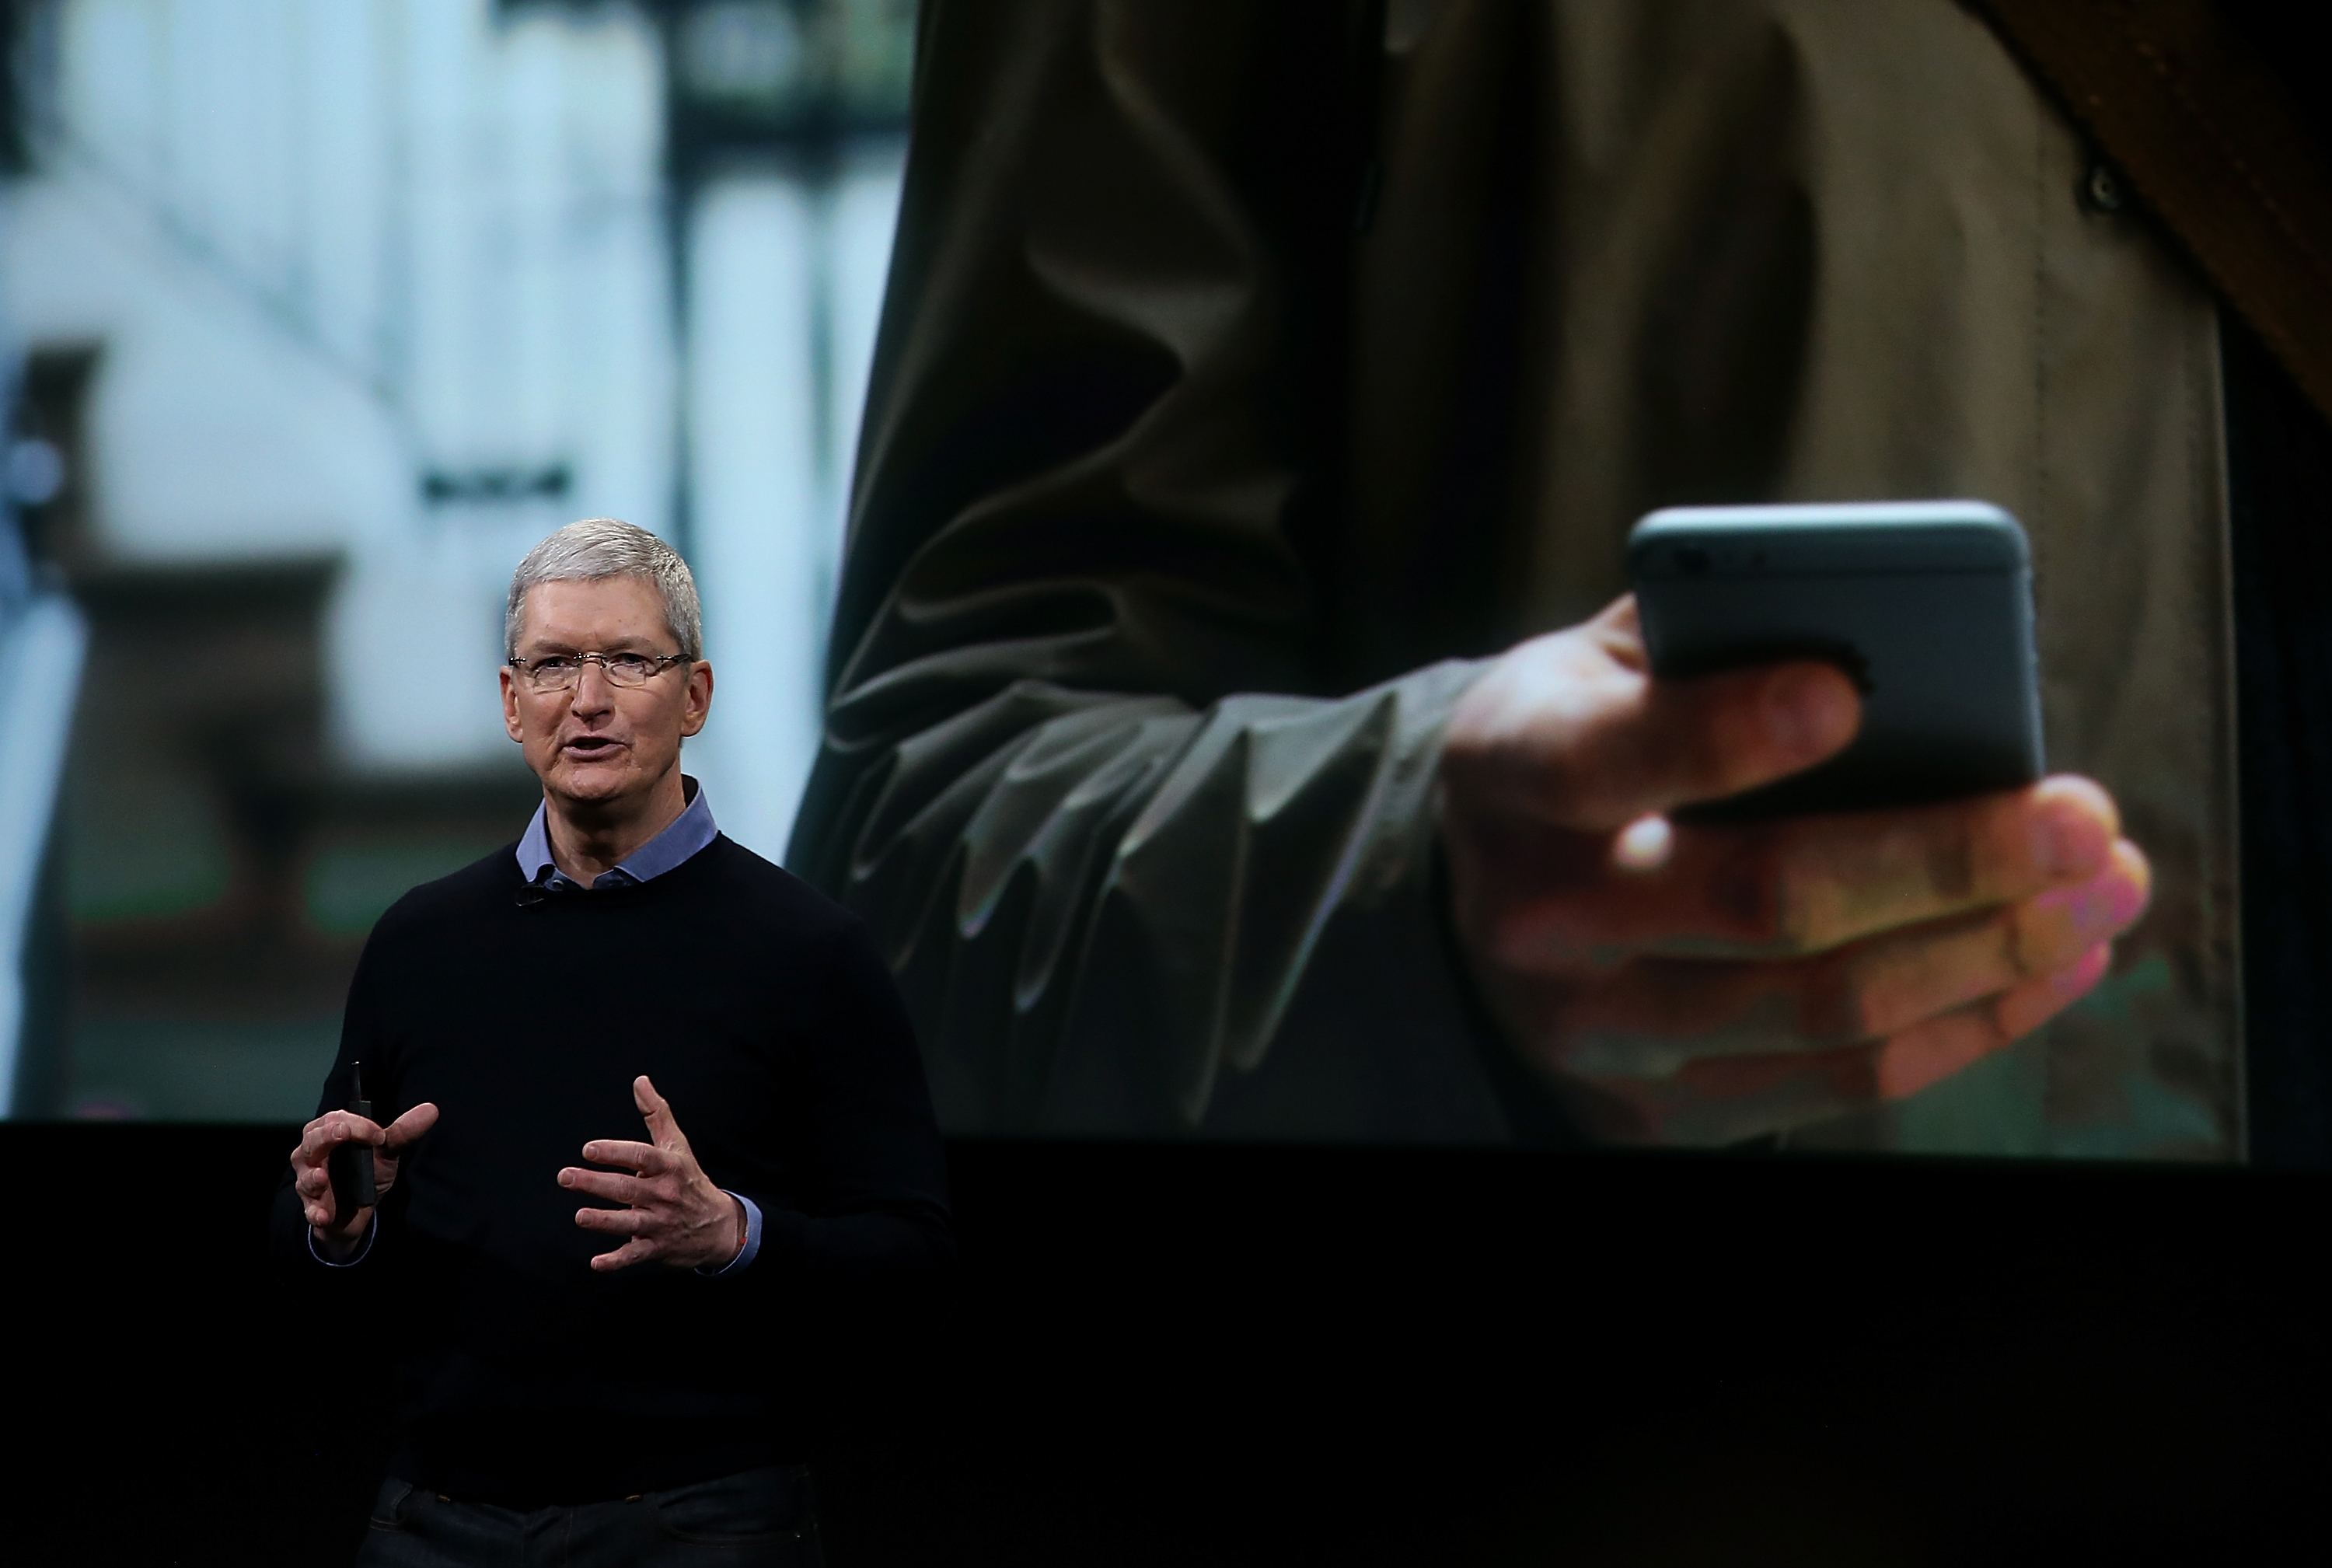 Apple CEO Tim Cook speaks during an Apple special event at the Apple headquarters on March 21, 2016 in Cupertino, California. (Justin Sullivan - Getty Images)